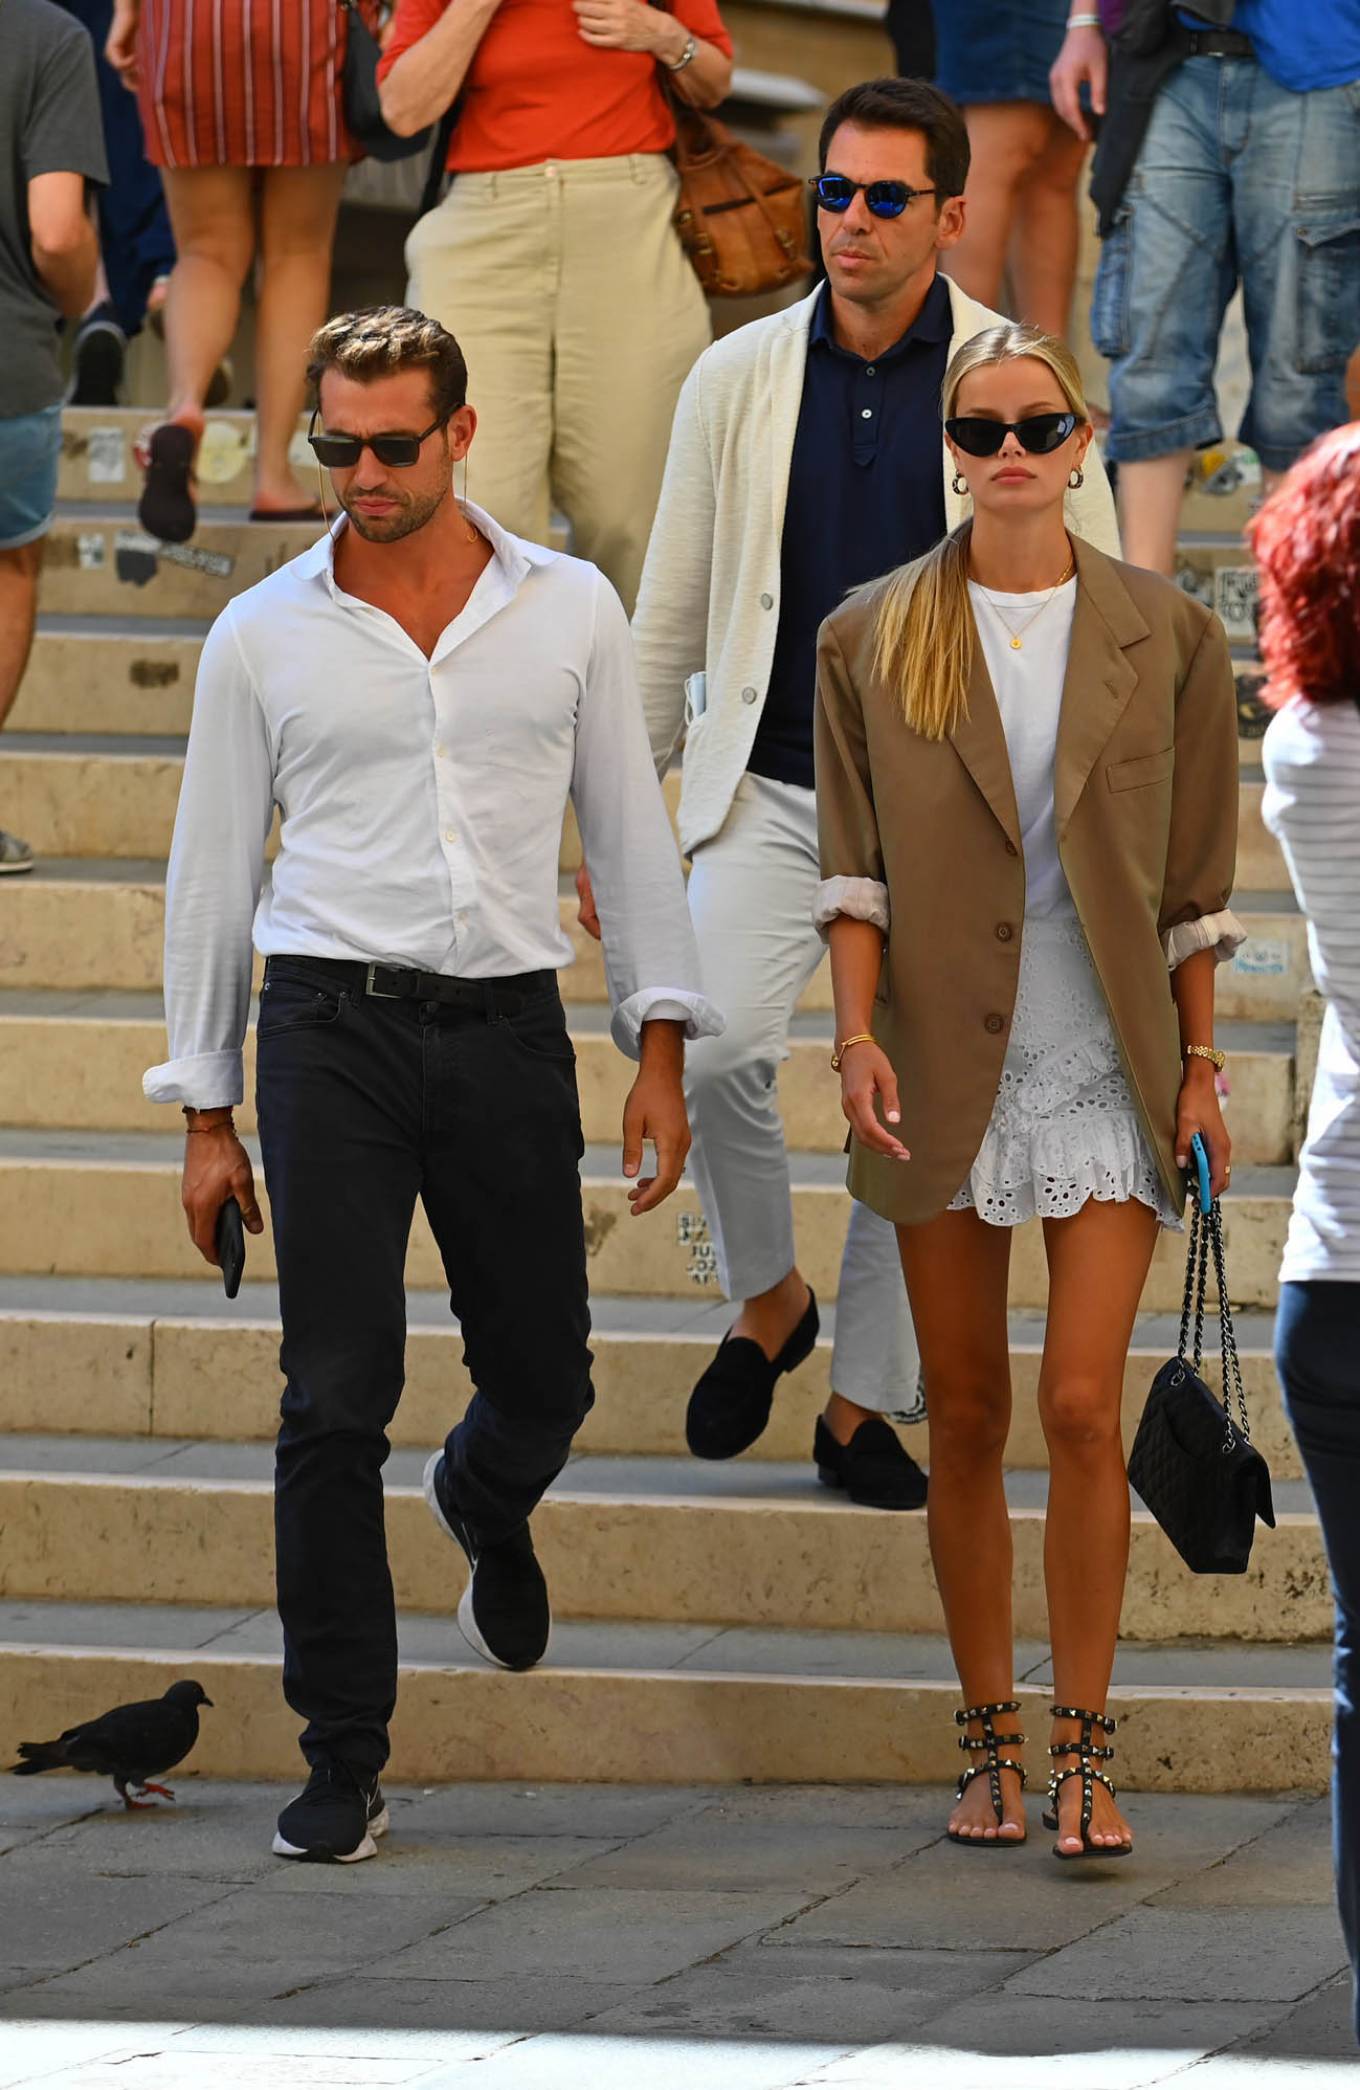 Frida Aasen 2020 : Frida Aasen hand in hand with Tommy Chiabra in Venice -Italy-01